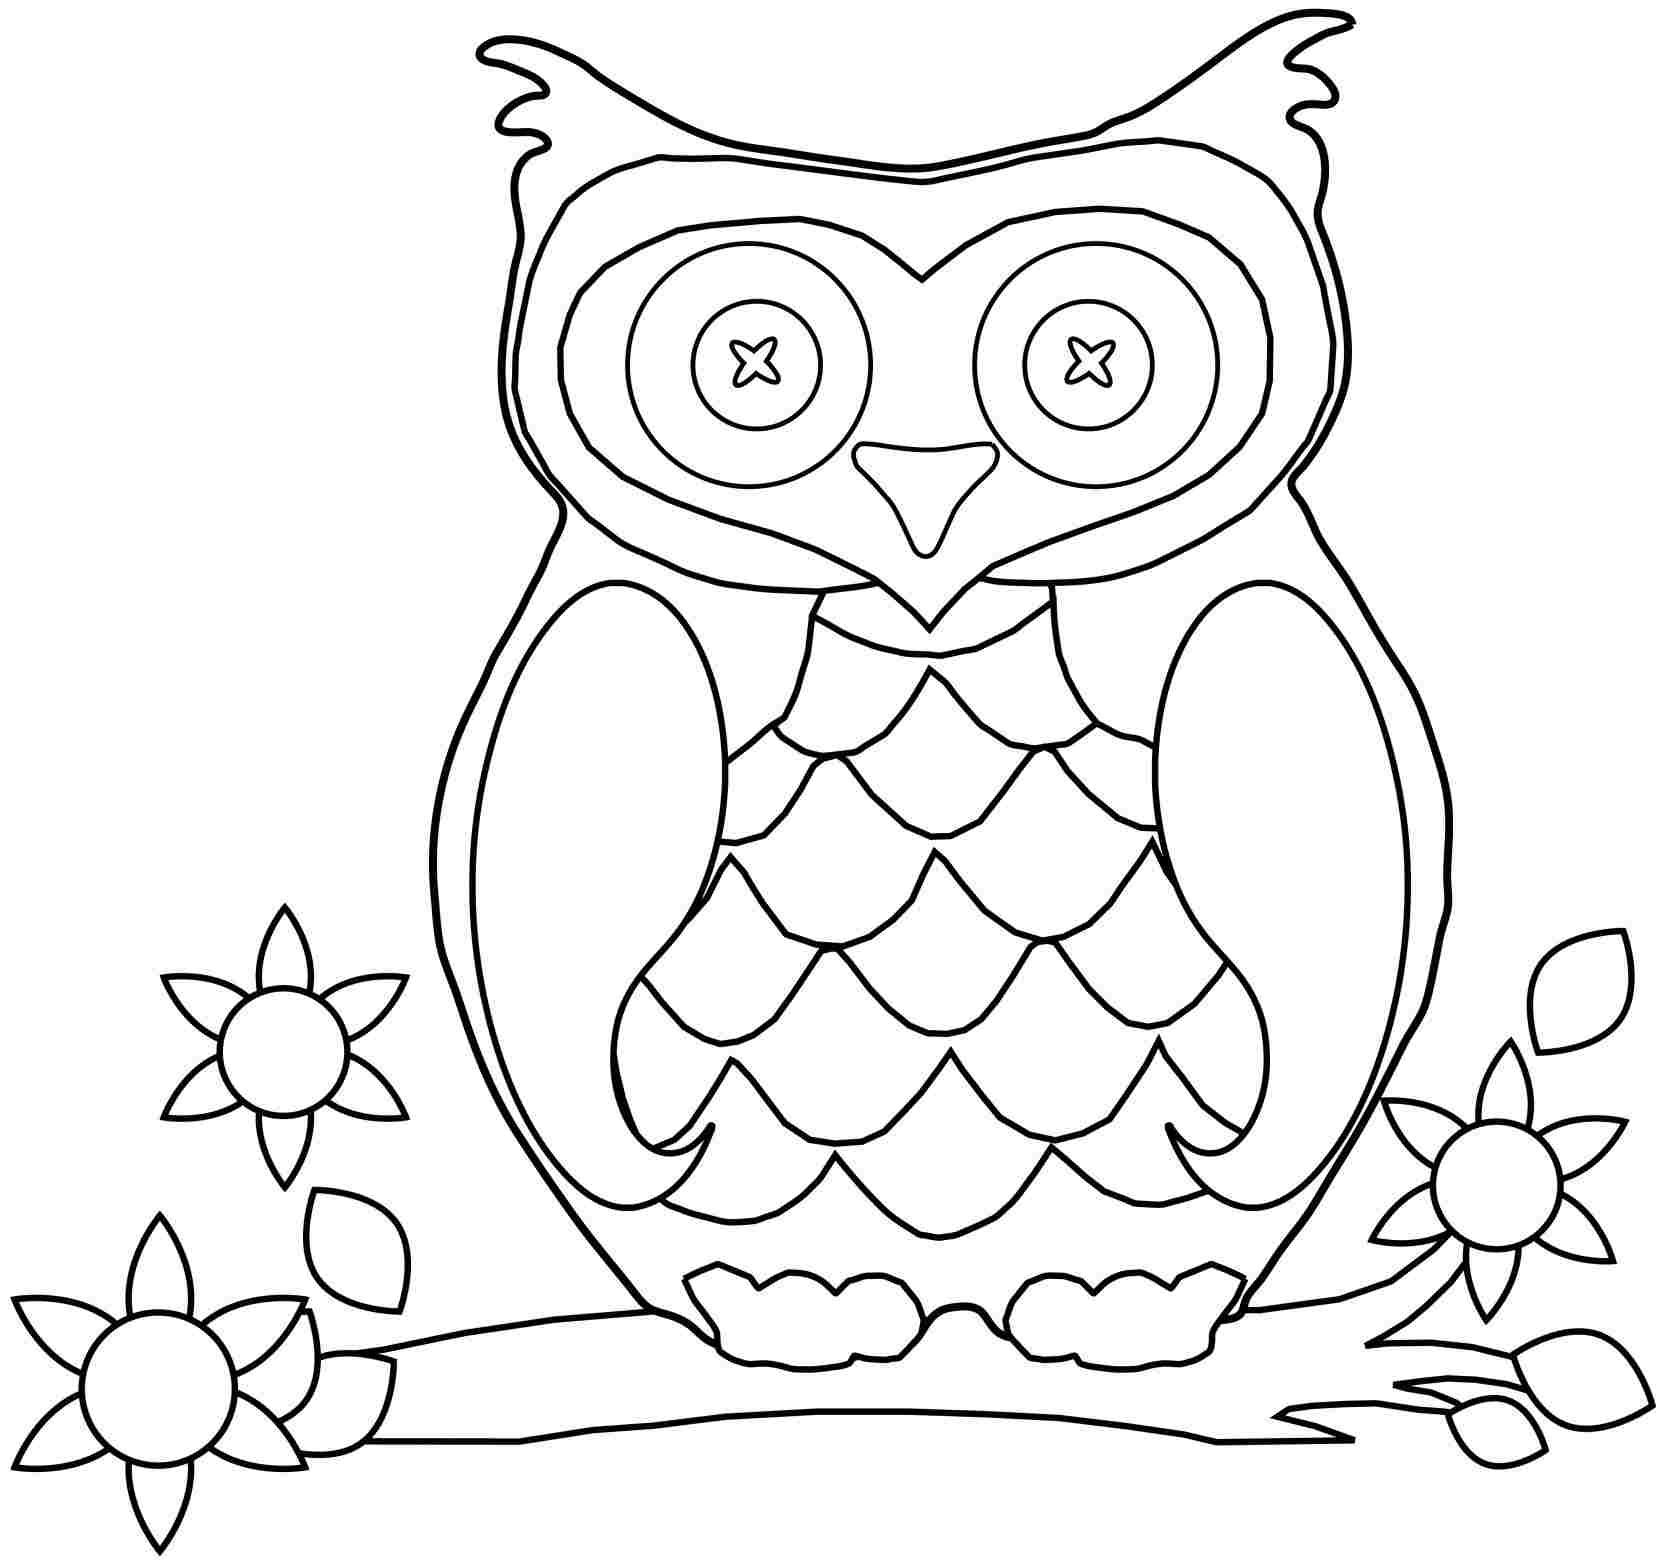 1000 ideas about owl coloring pages on pinterest coloring pages ...